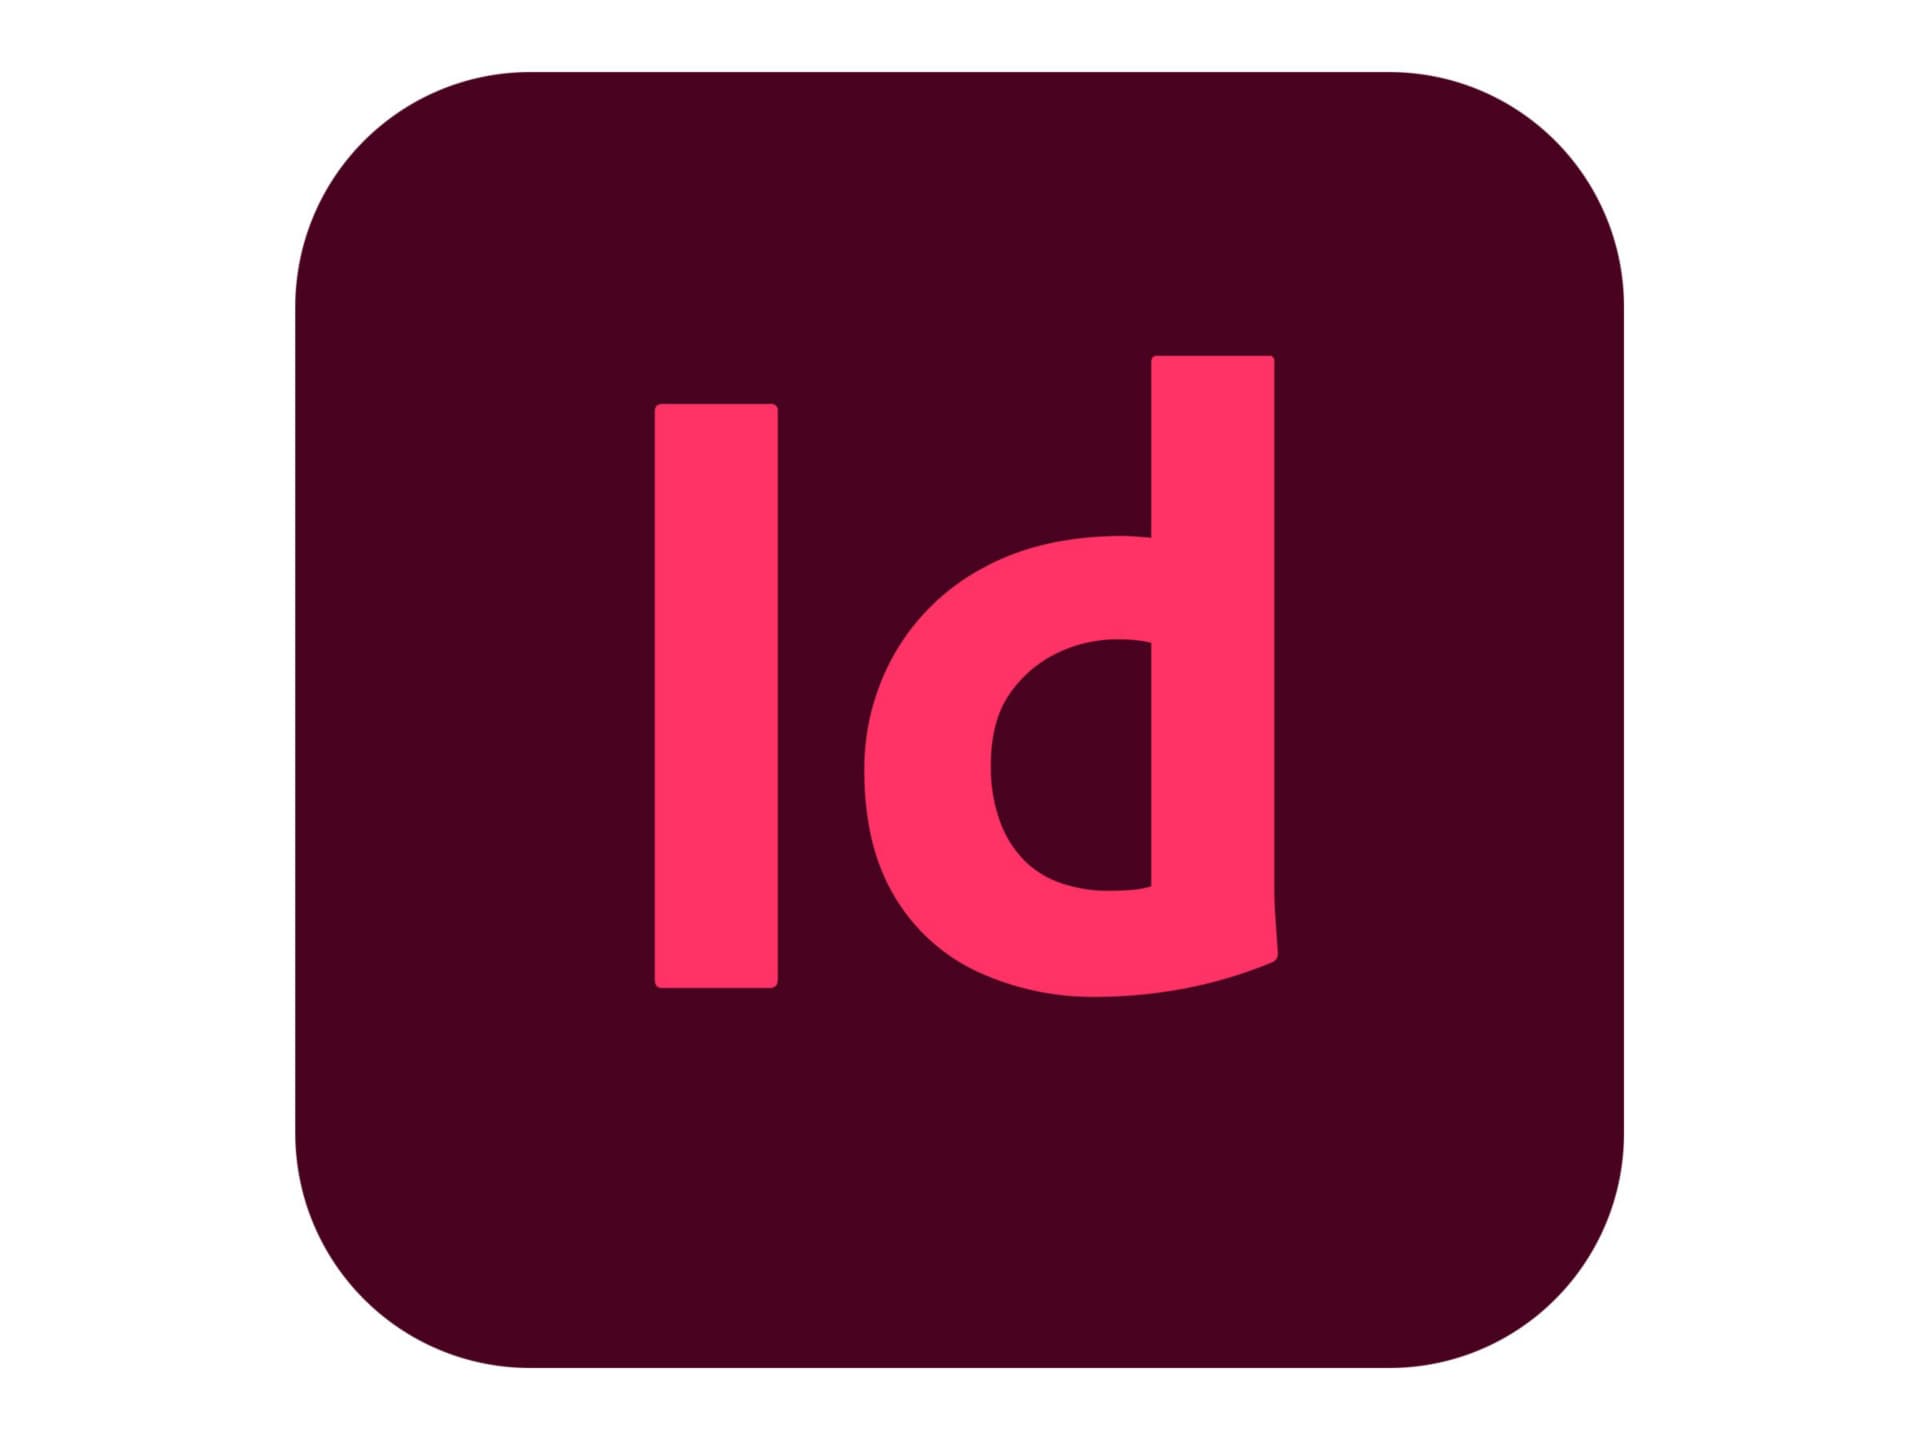 Adobe InDesign CC for teams - Subscription New - 1 user